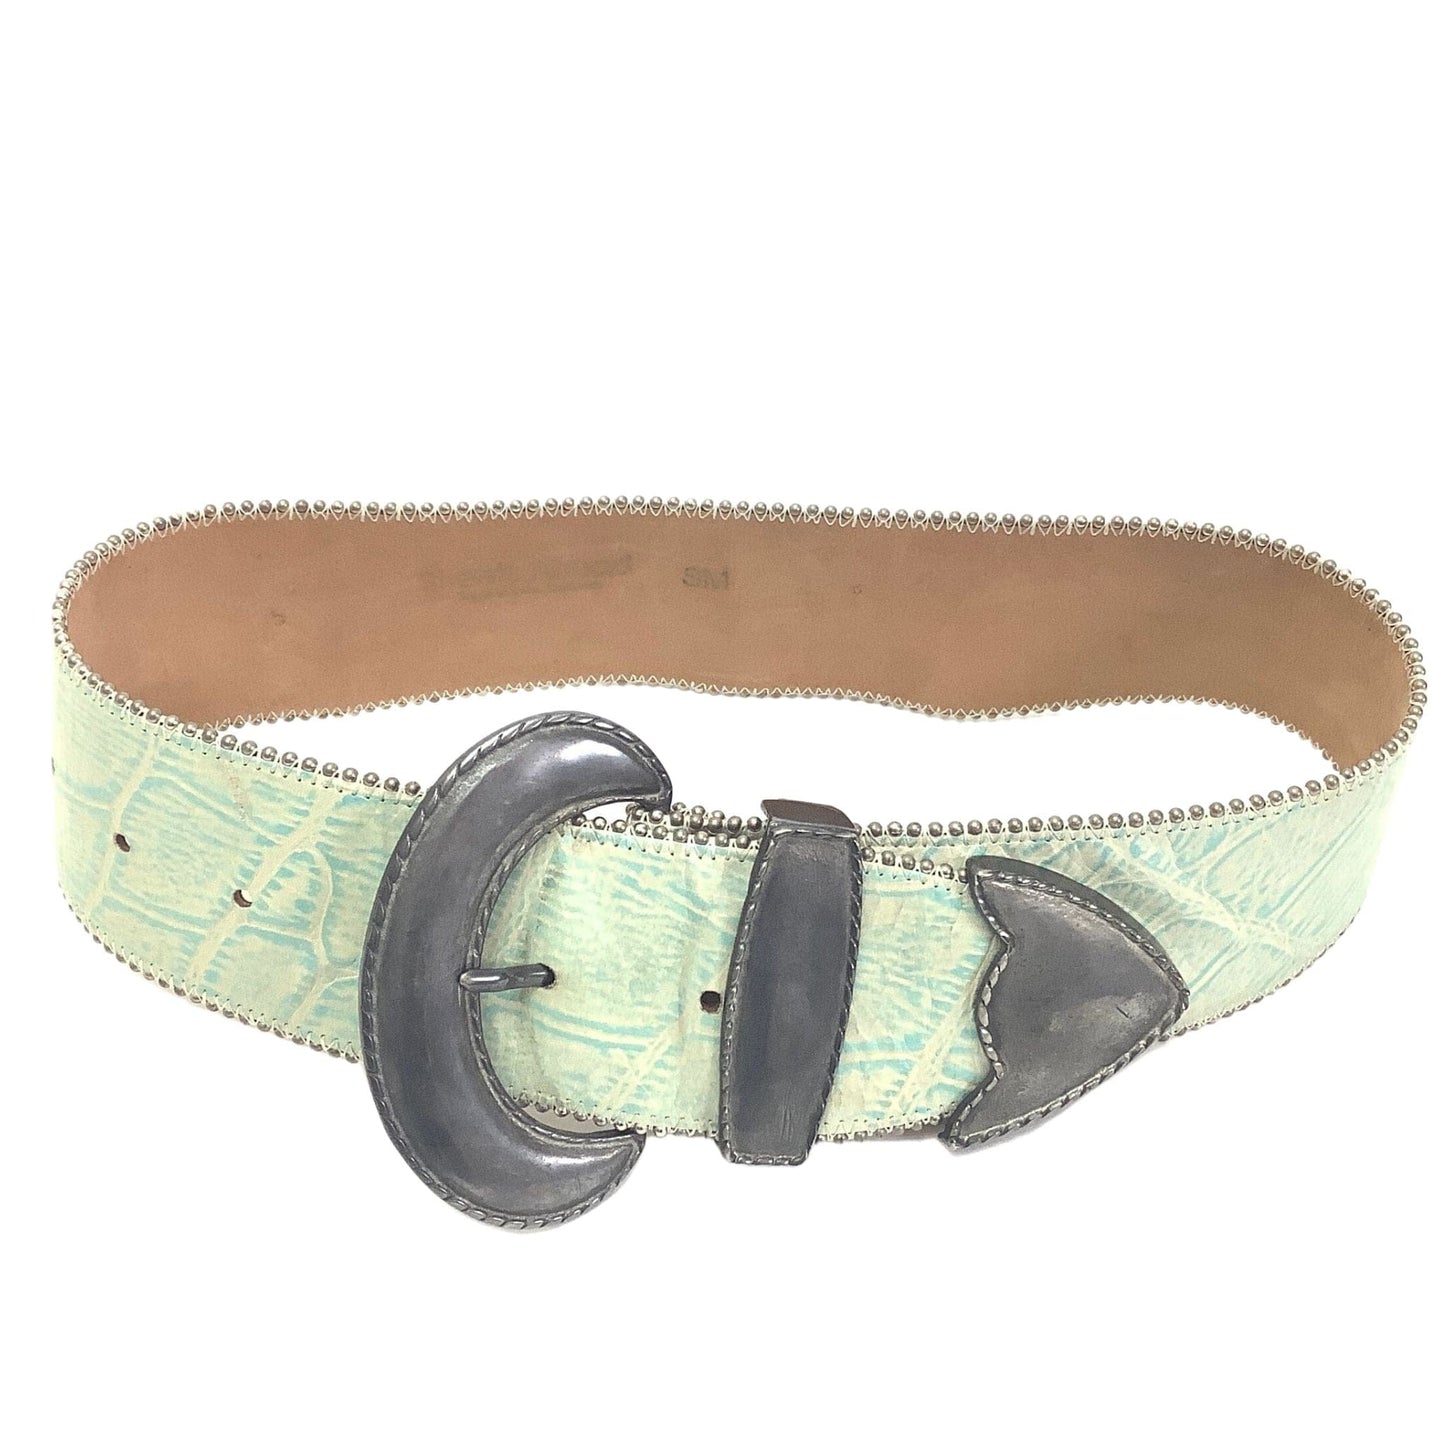 1980s Green Leather Belt Small / Green / Vintage 1980s